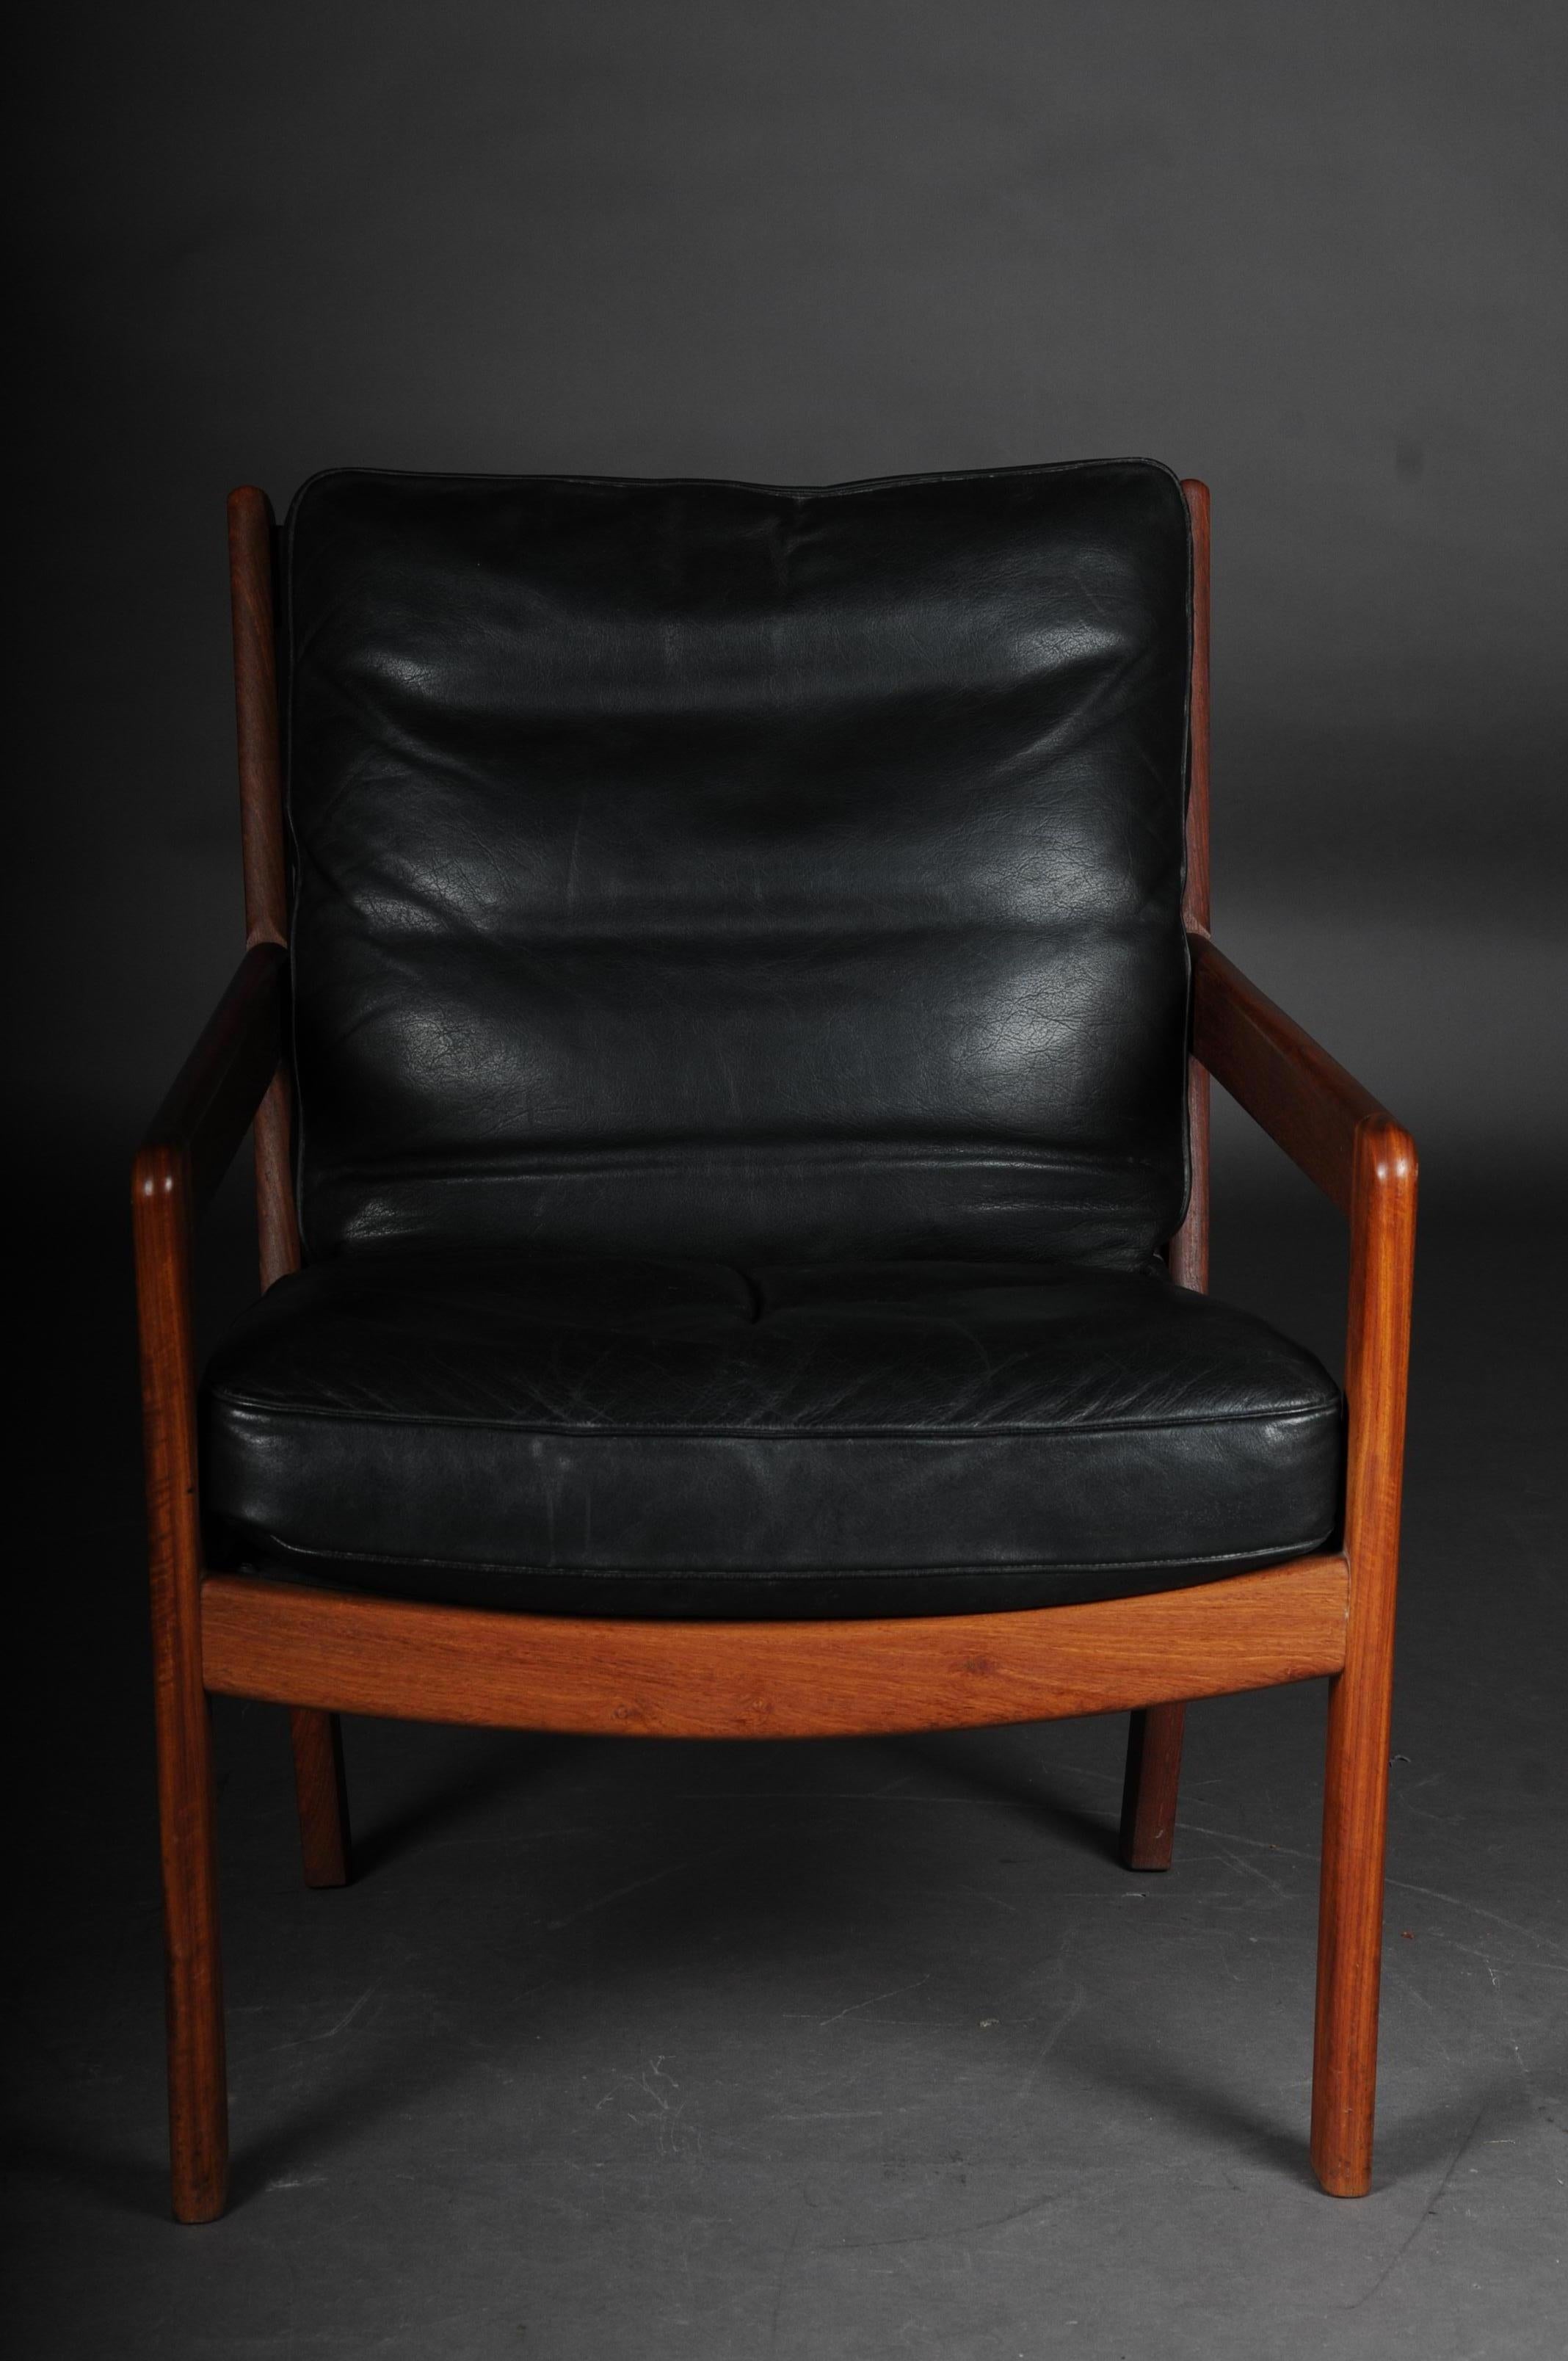 Pair of vintage teak armchairs, chairs, 1960s-1970s, Danish

Solid teak, simple and extremely comfortable armchair. Probably from the 1960s-1970s
The upholstered chair, convincing by its simple elegance, was originally based on the design of the